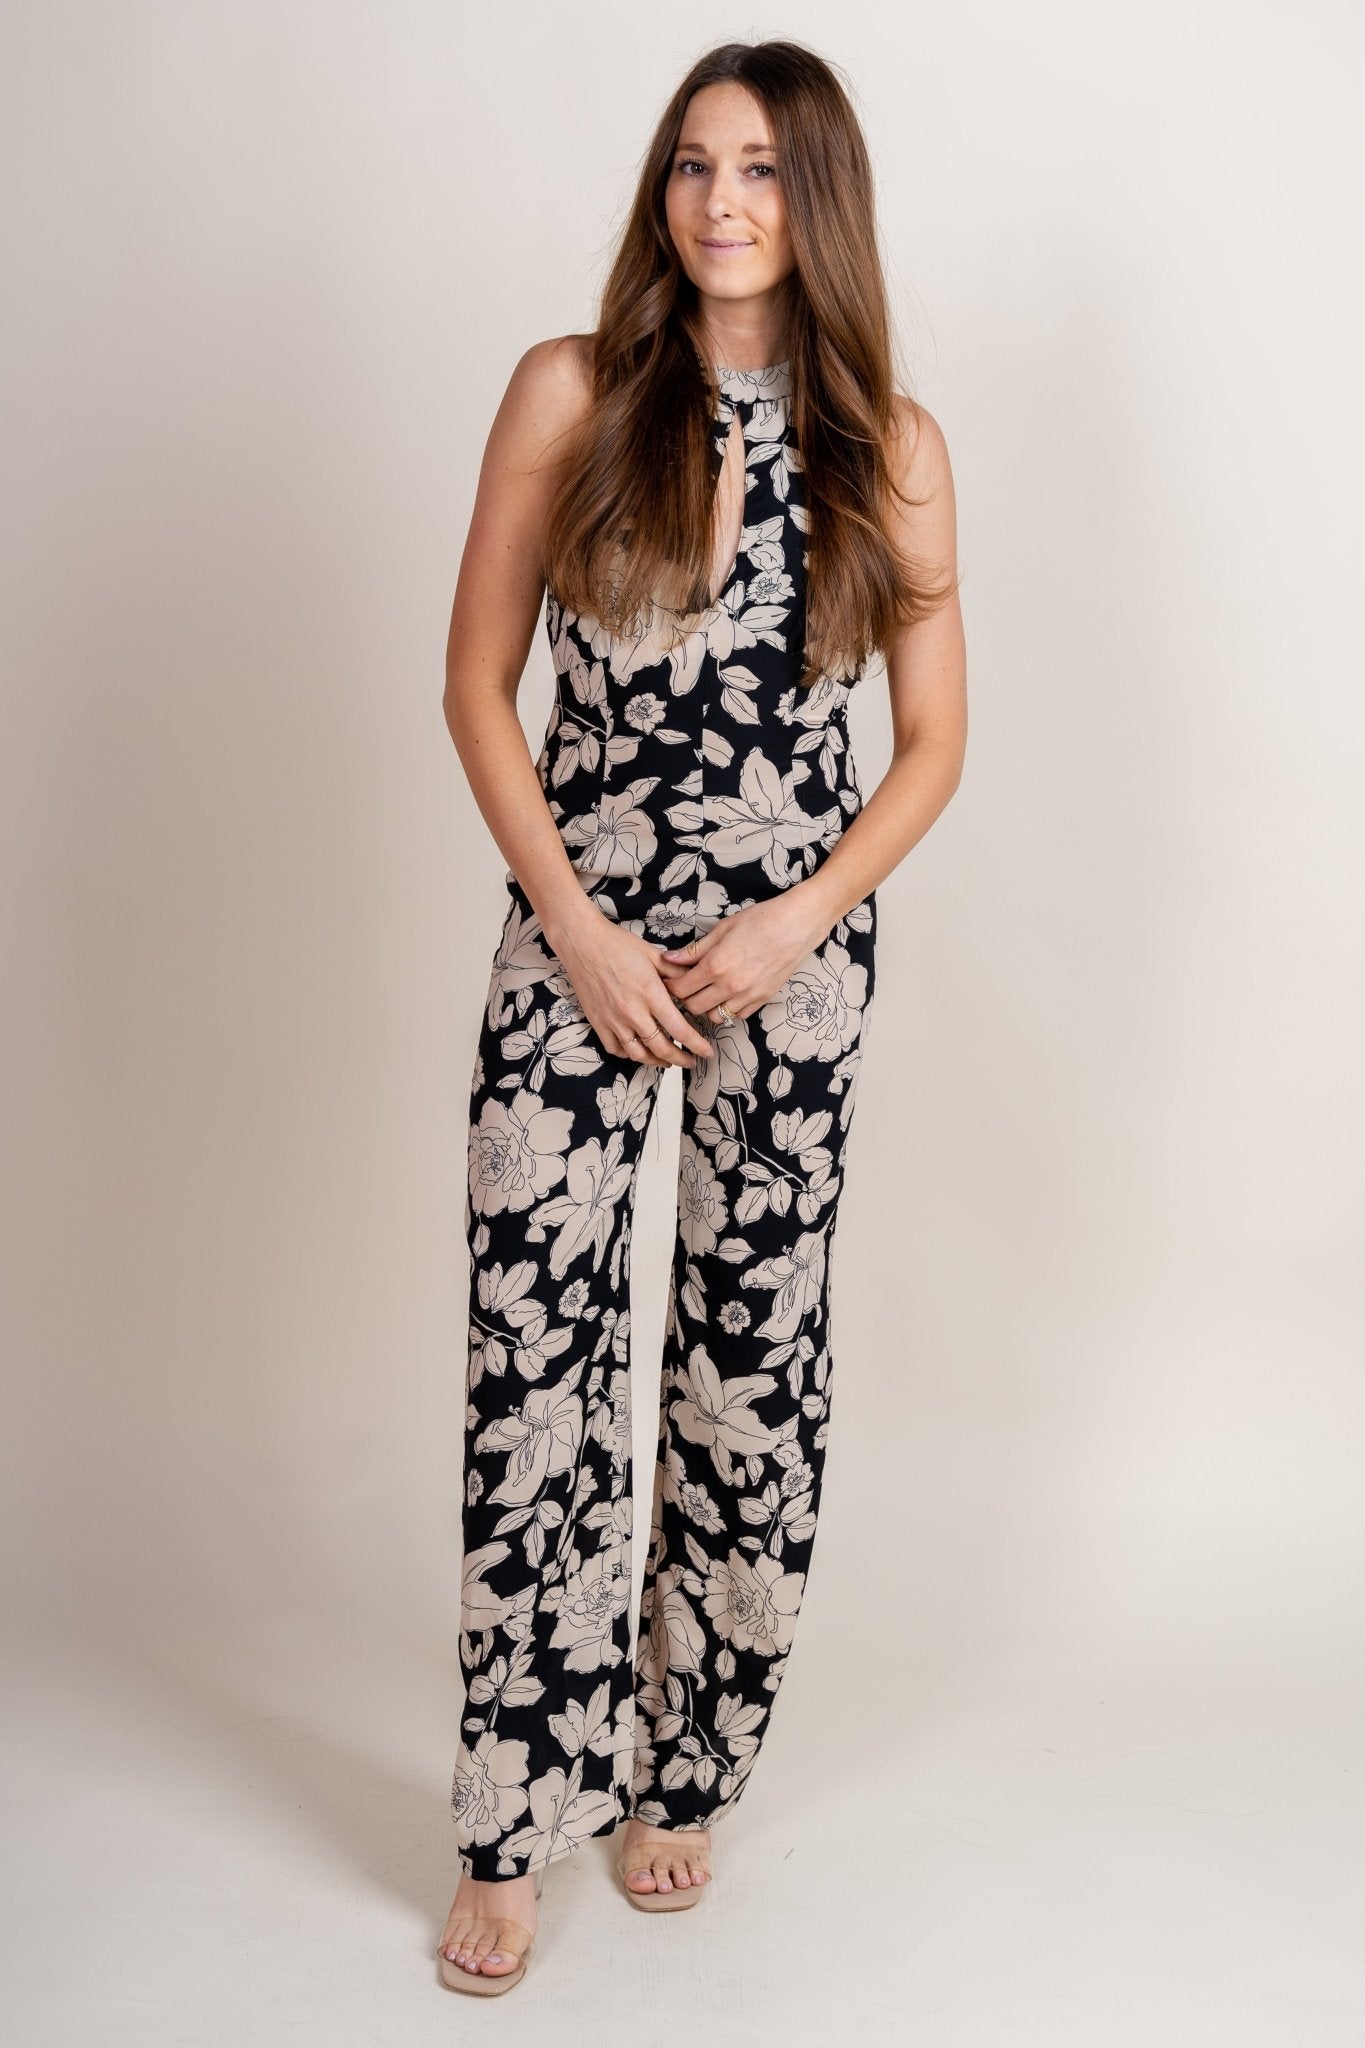 Flower print jumpsuit black/white - Trendy Jumpsuit - Fashion Rompers & Pantsuits at Lush Fashion Lounge Boutique in Oklahoma City